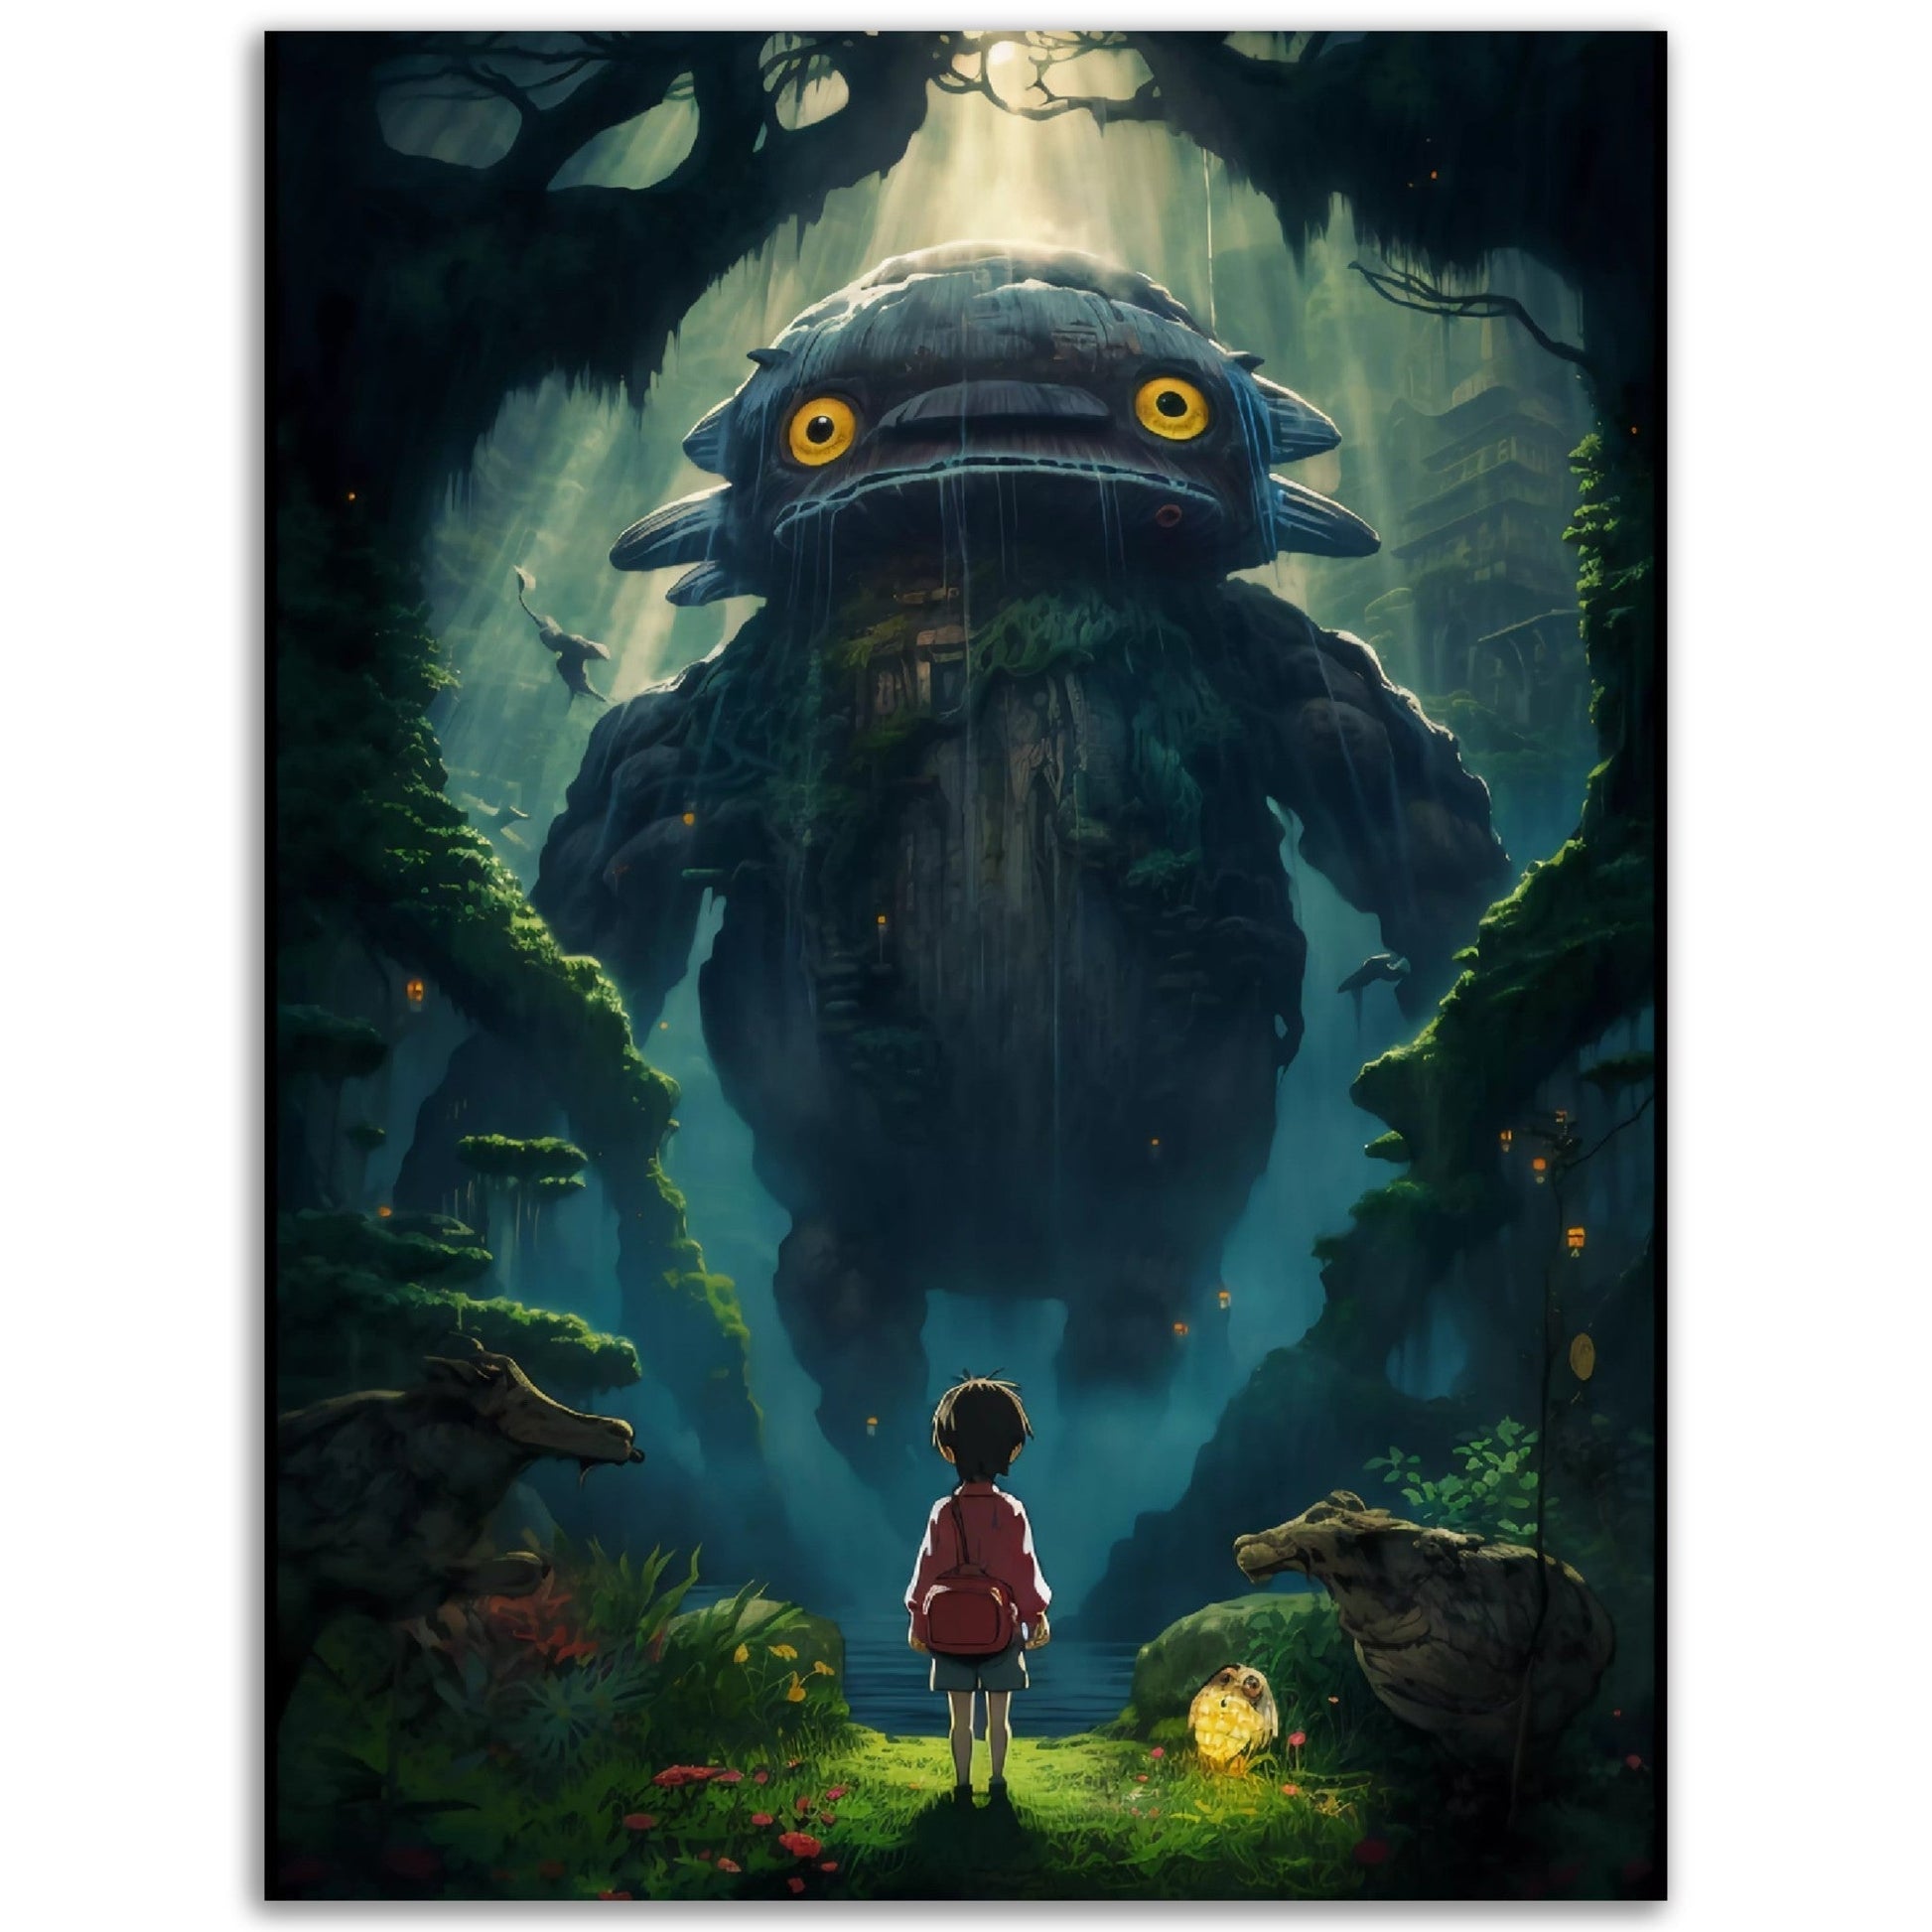 A high quality colored "We Are Large But We Are Friends" wall art poster of a girl standing in front of a giant monster, perfect for rooms.